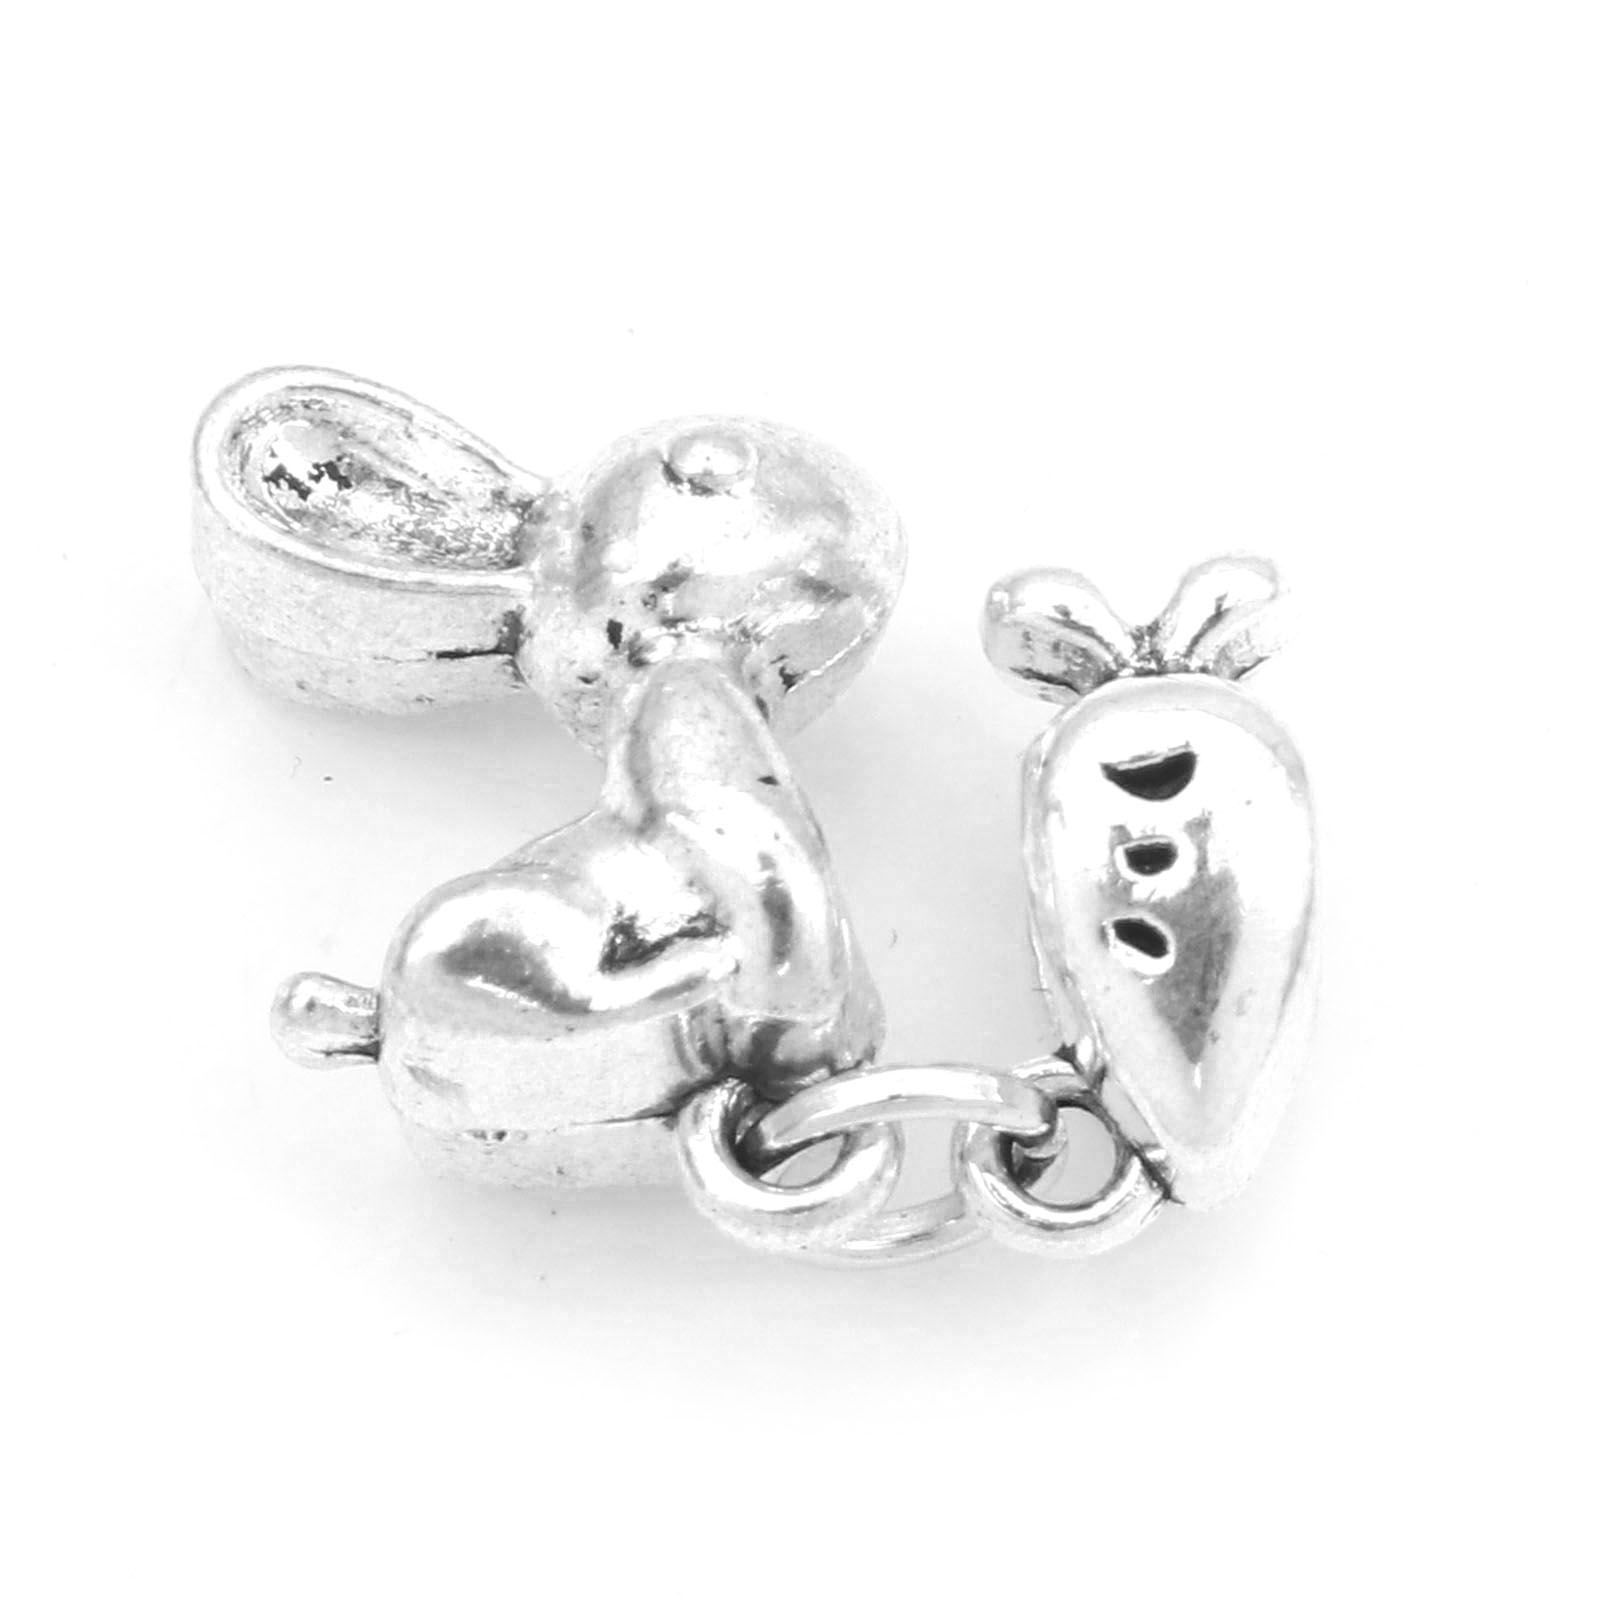 Picture of Zinc Based Alloy European Style Large Hole Charm Beads Antique Silver Color Rabbit Animal Radish 11.4x10.3mm - 9.6x4.7mm, Hole: Approx 4mm, 10 Sets